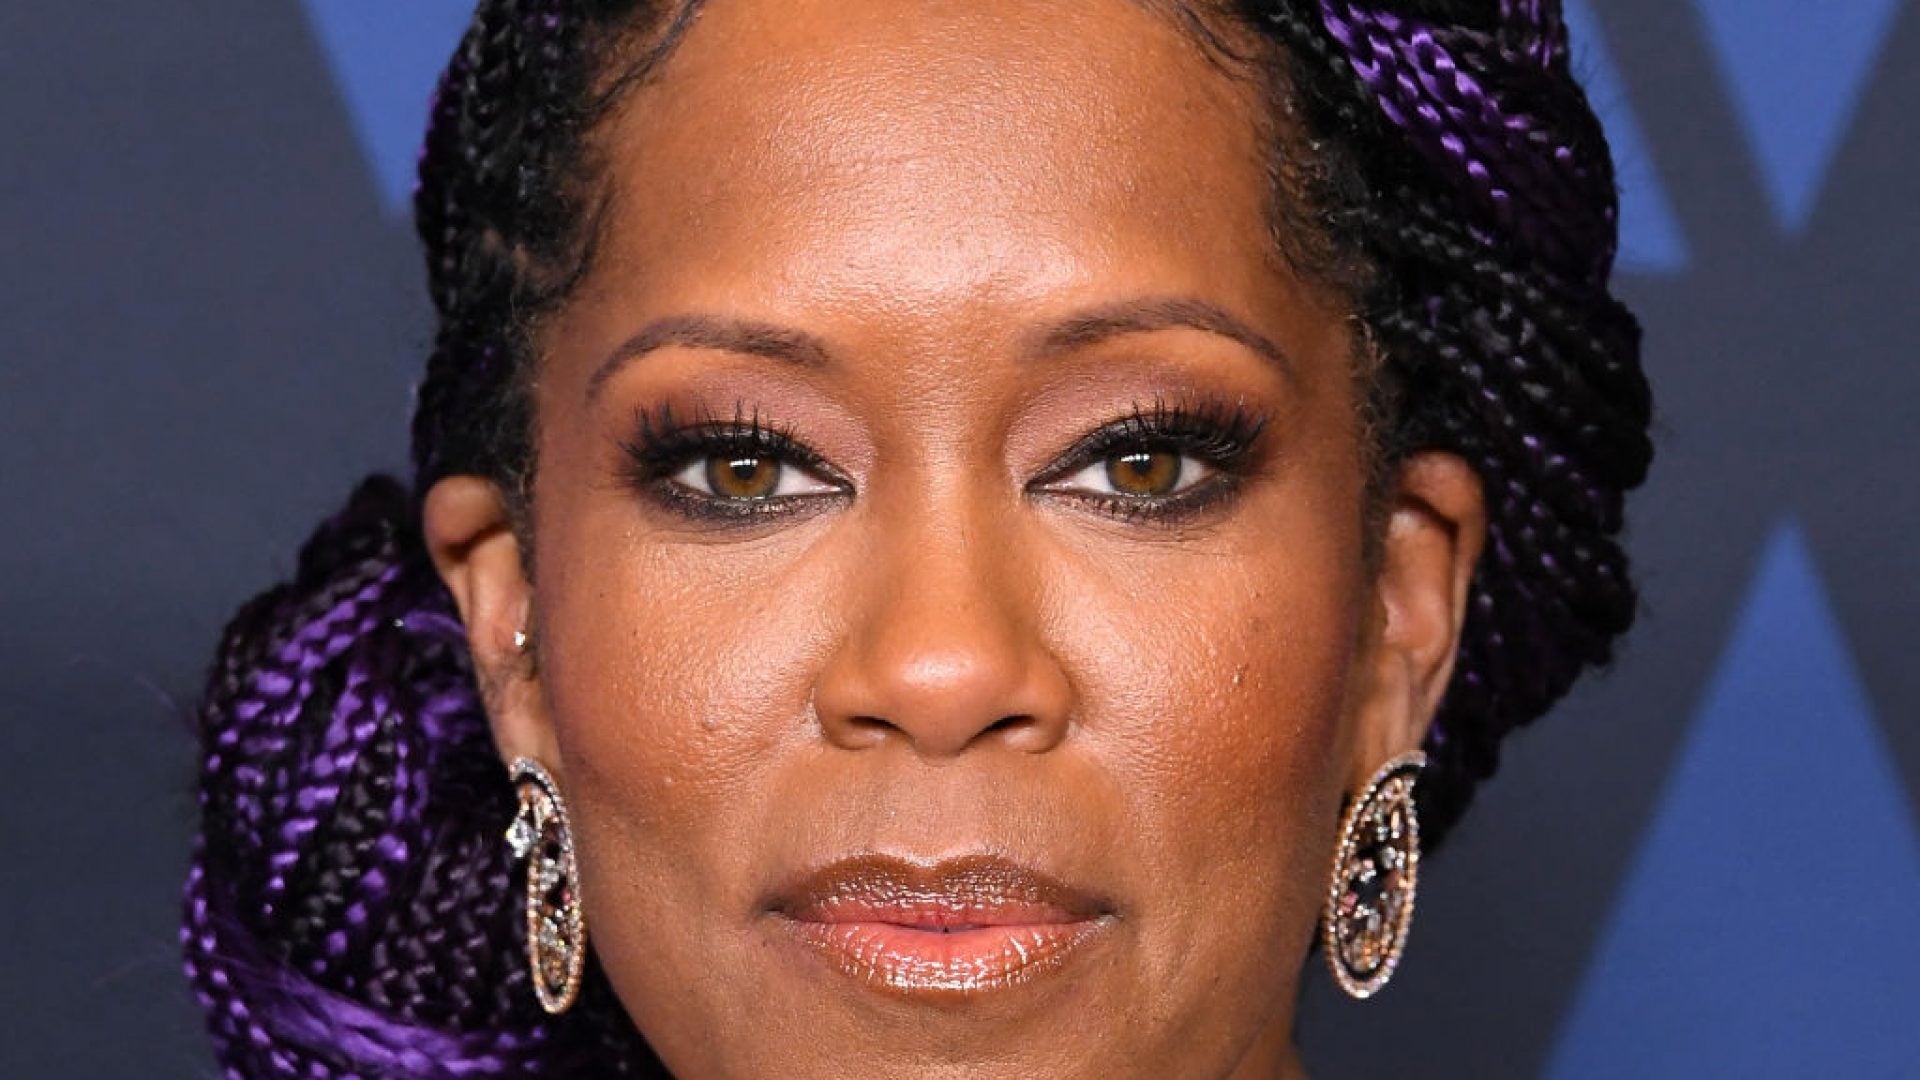 Regina King, Viola Davis, D-Nice Up For Entertainer Of The Year At This Year's NAACP Image Awards